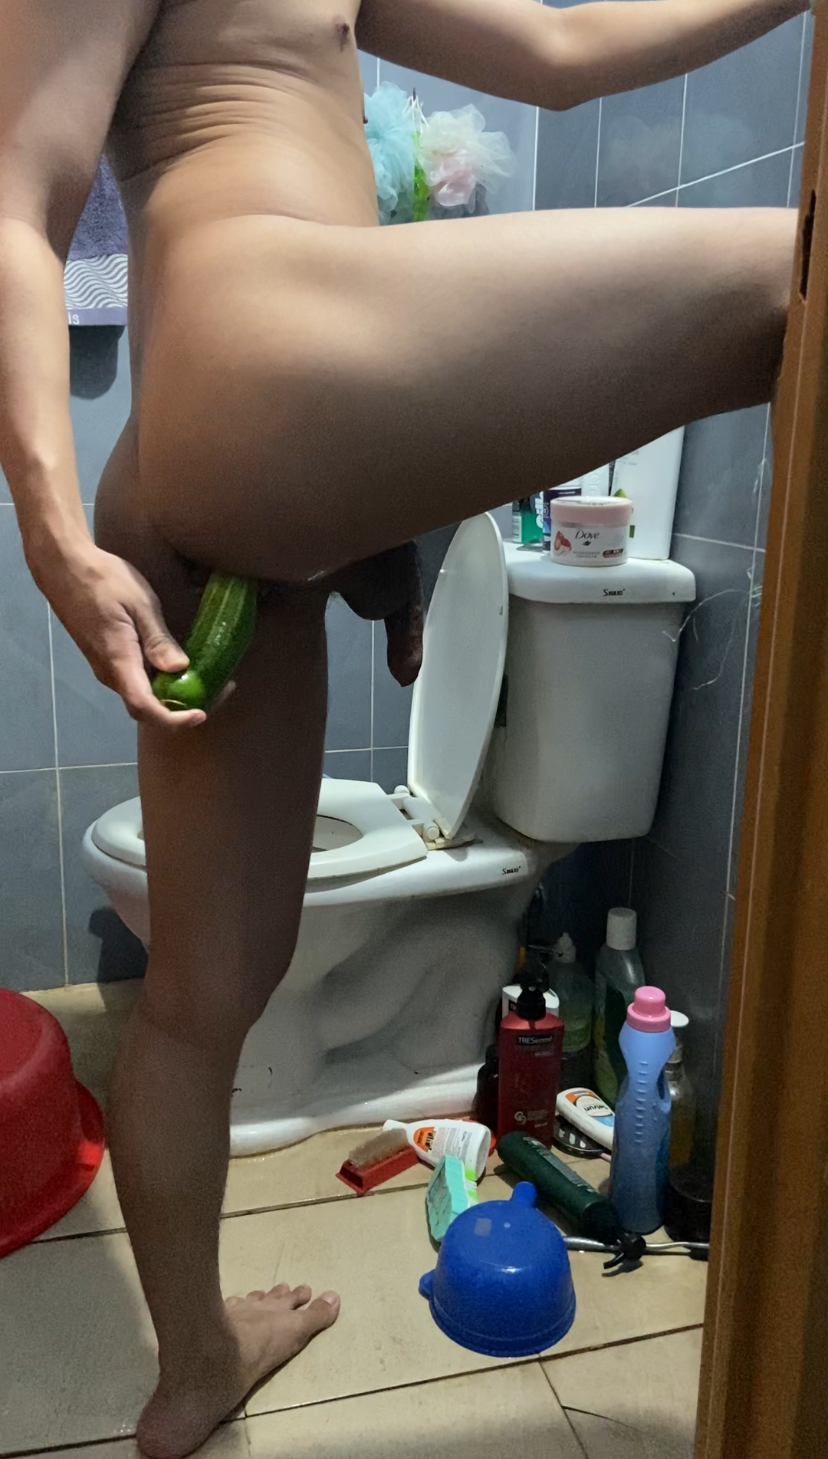 playing with cucumber - video 2